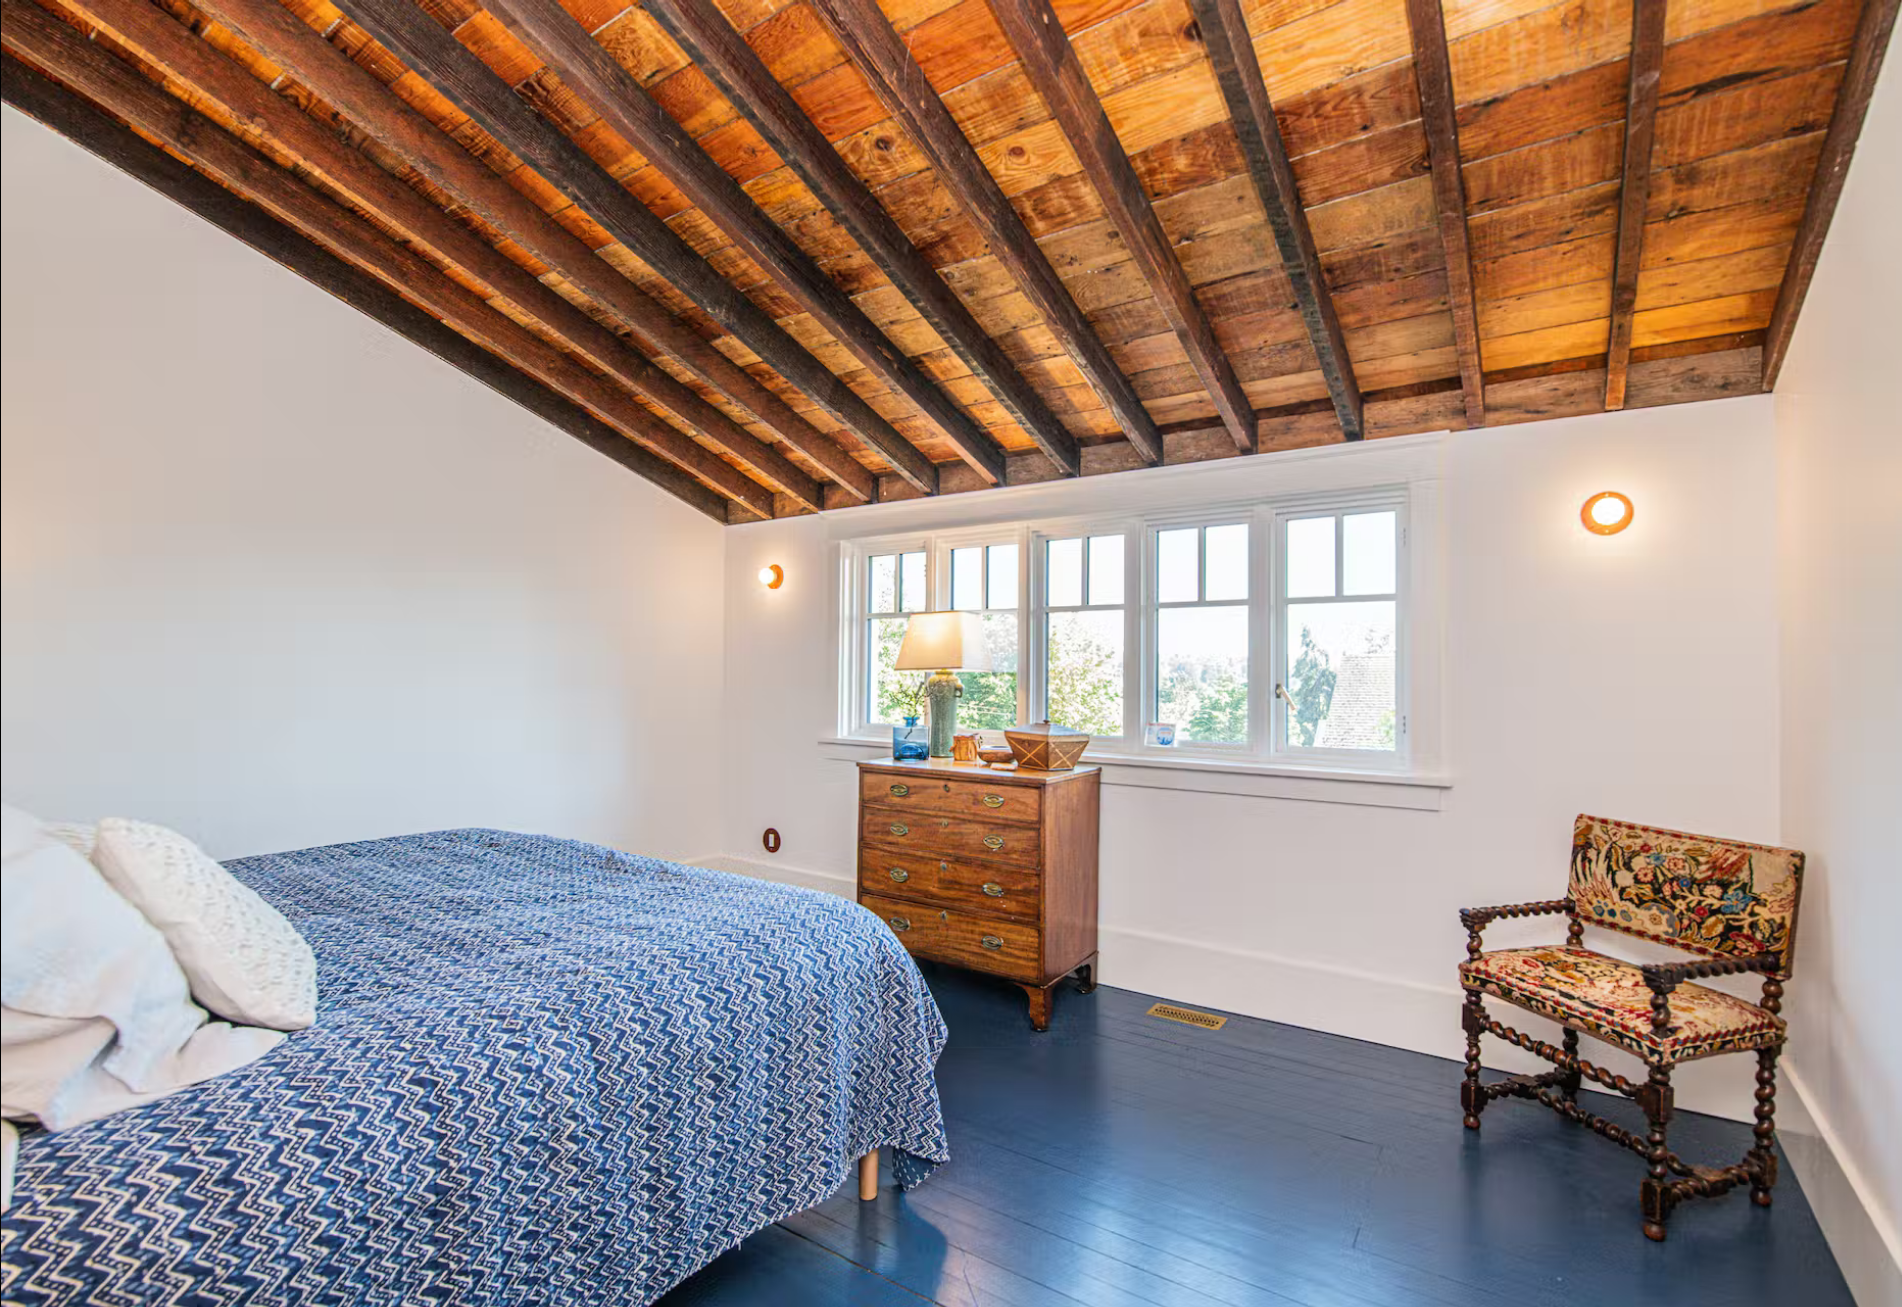 Interior bedroom with blue pained floor and windows; bed with blue bedspread; raftered ceiling – photo